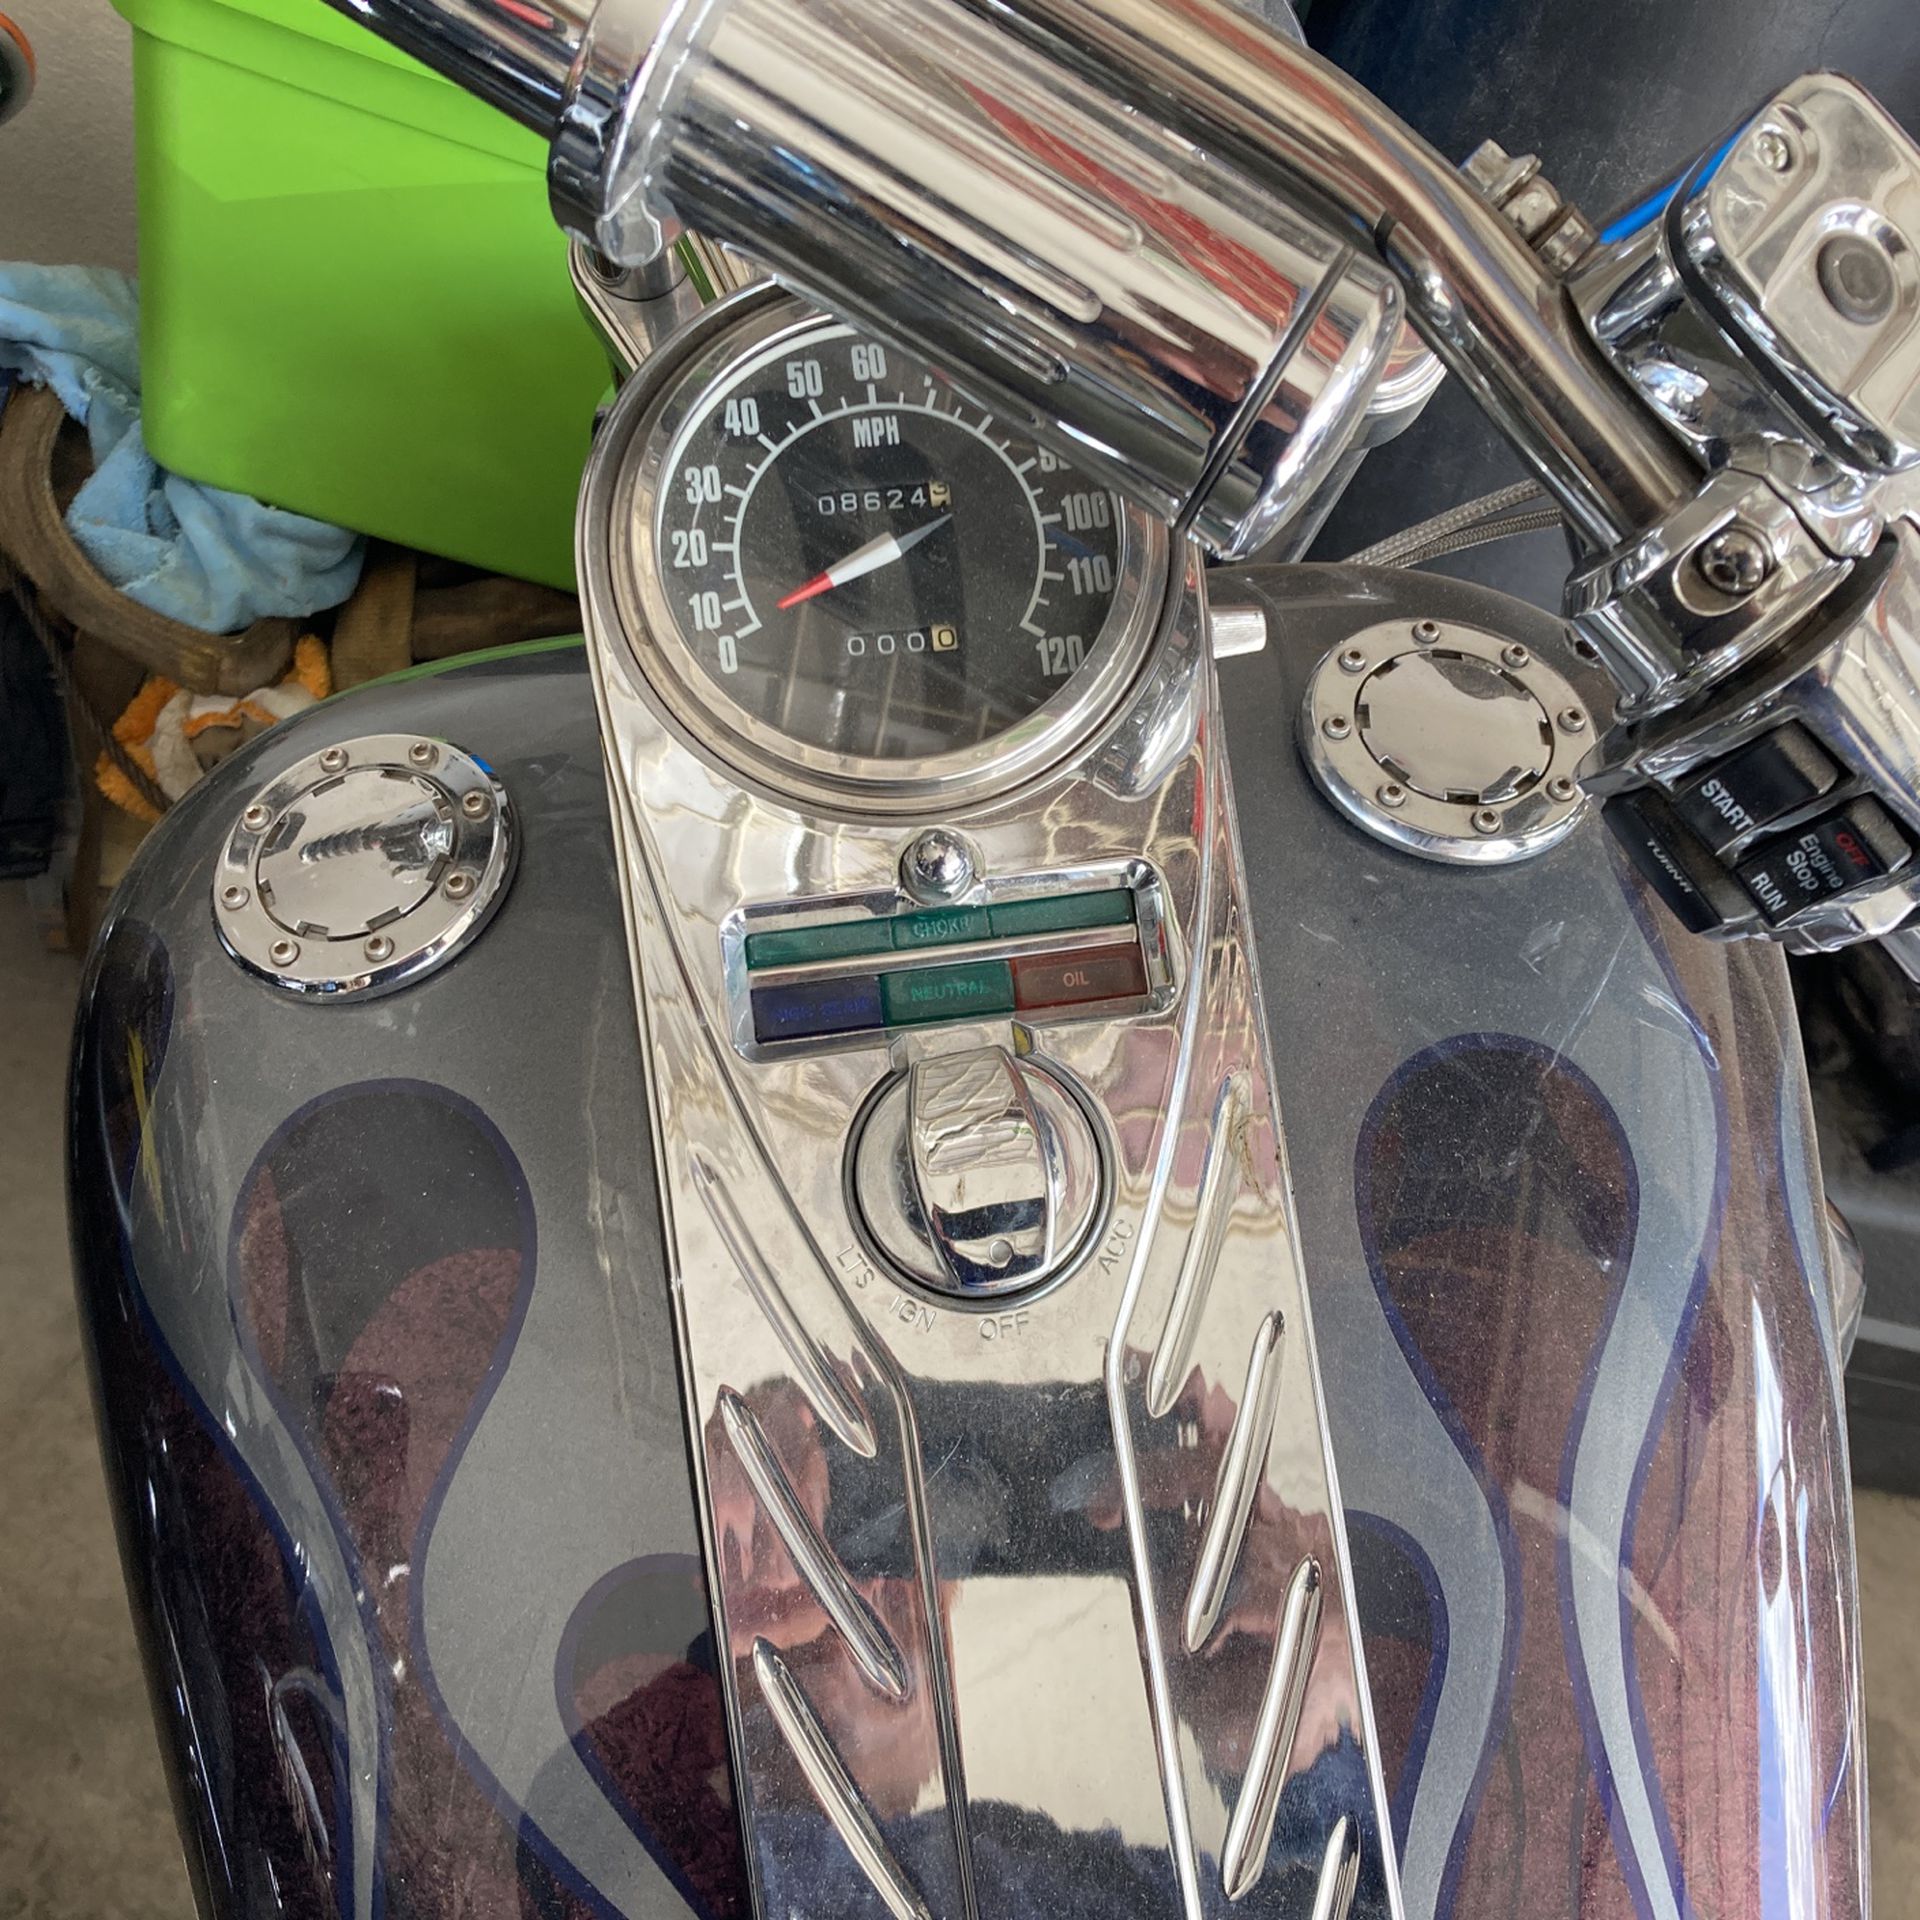 1998 Indian Scout